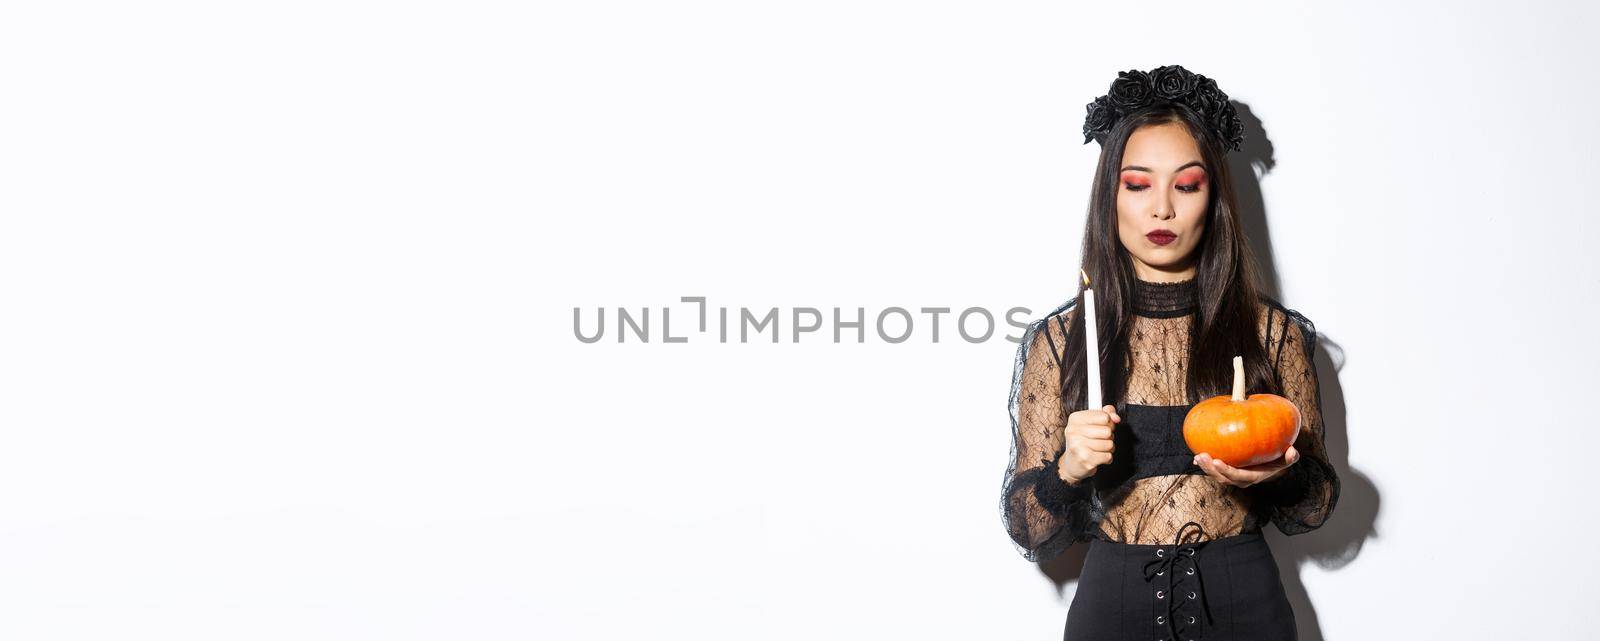 Myserious asian wicked witch in gothic dress, looking at lit candle, holding pumpkin, standing over white background.